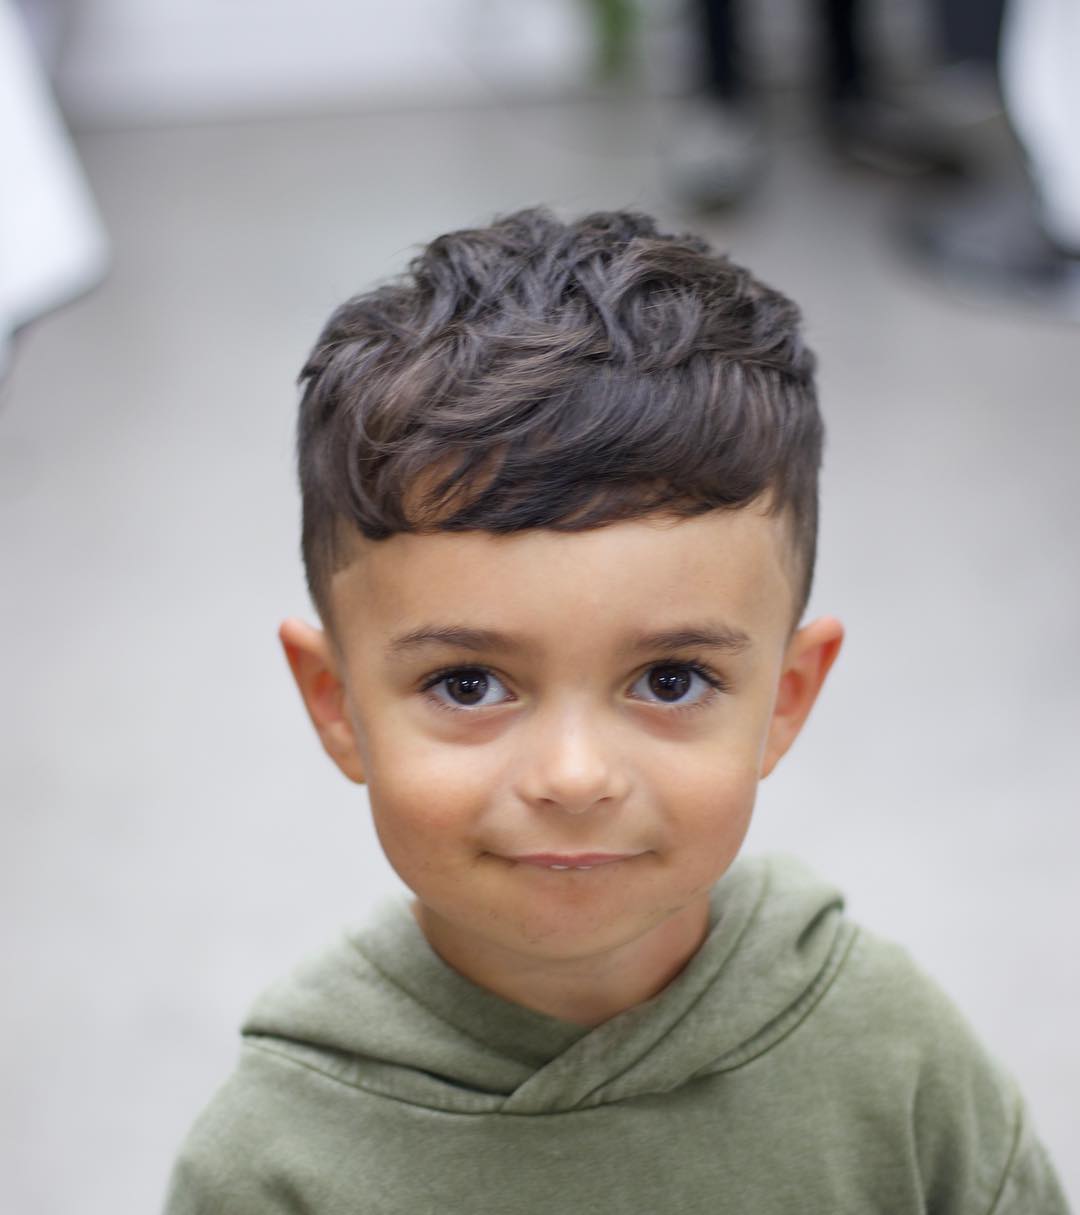 Haircuts for little boys